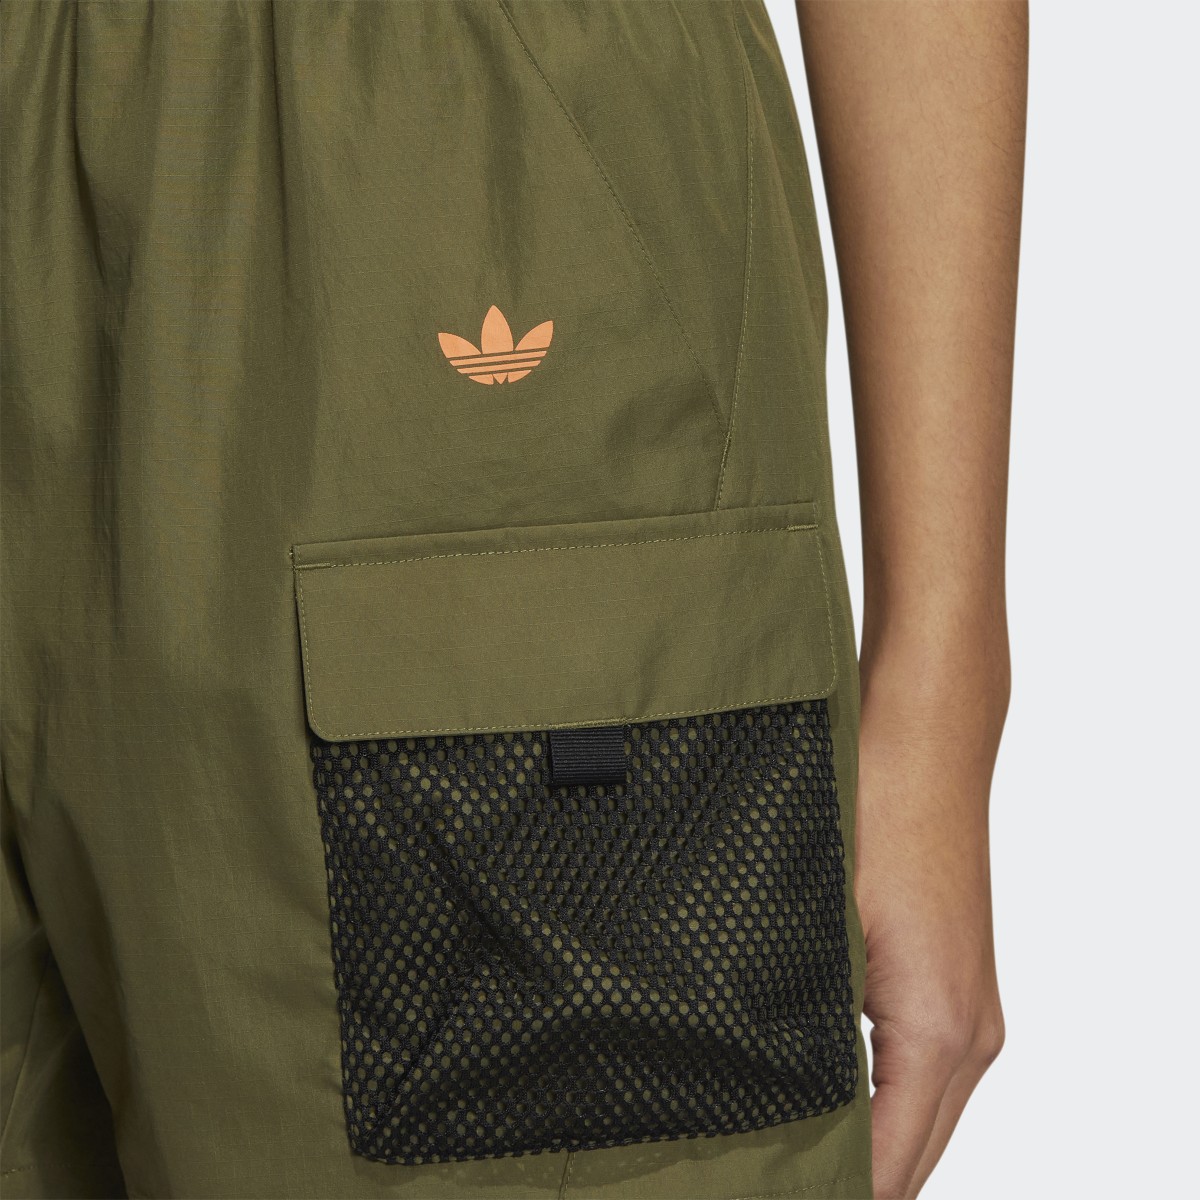 Adidas Outdoor Graphic Shorts. 5